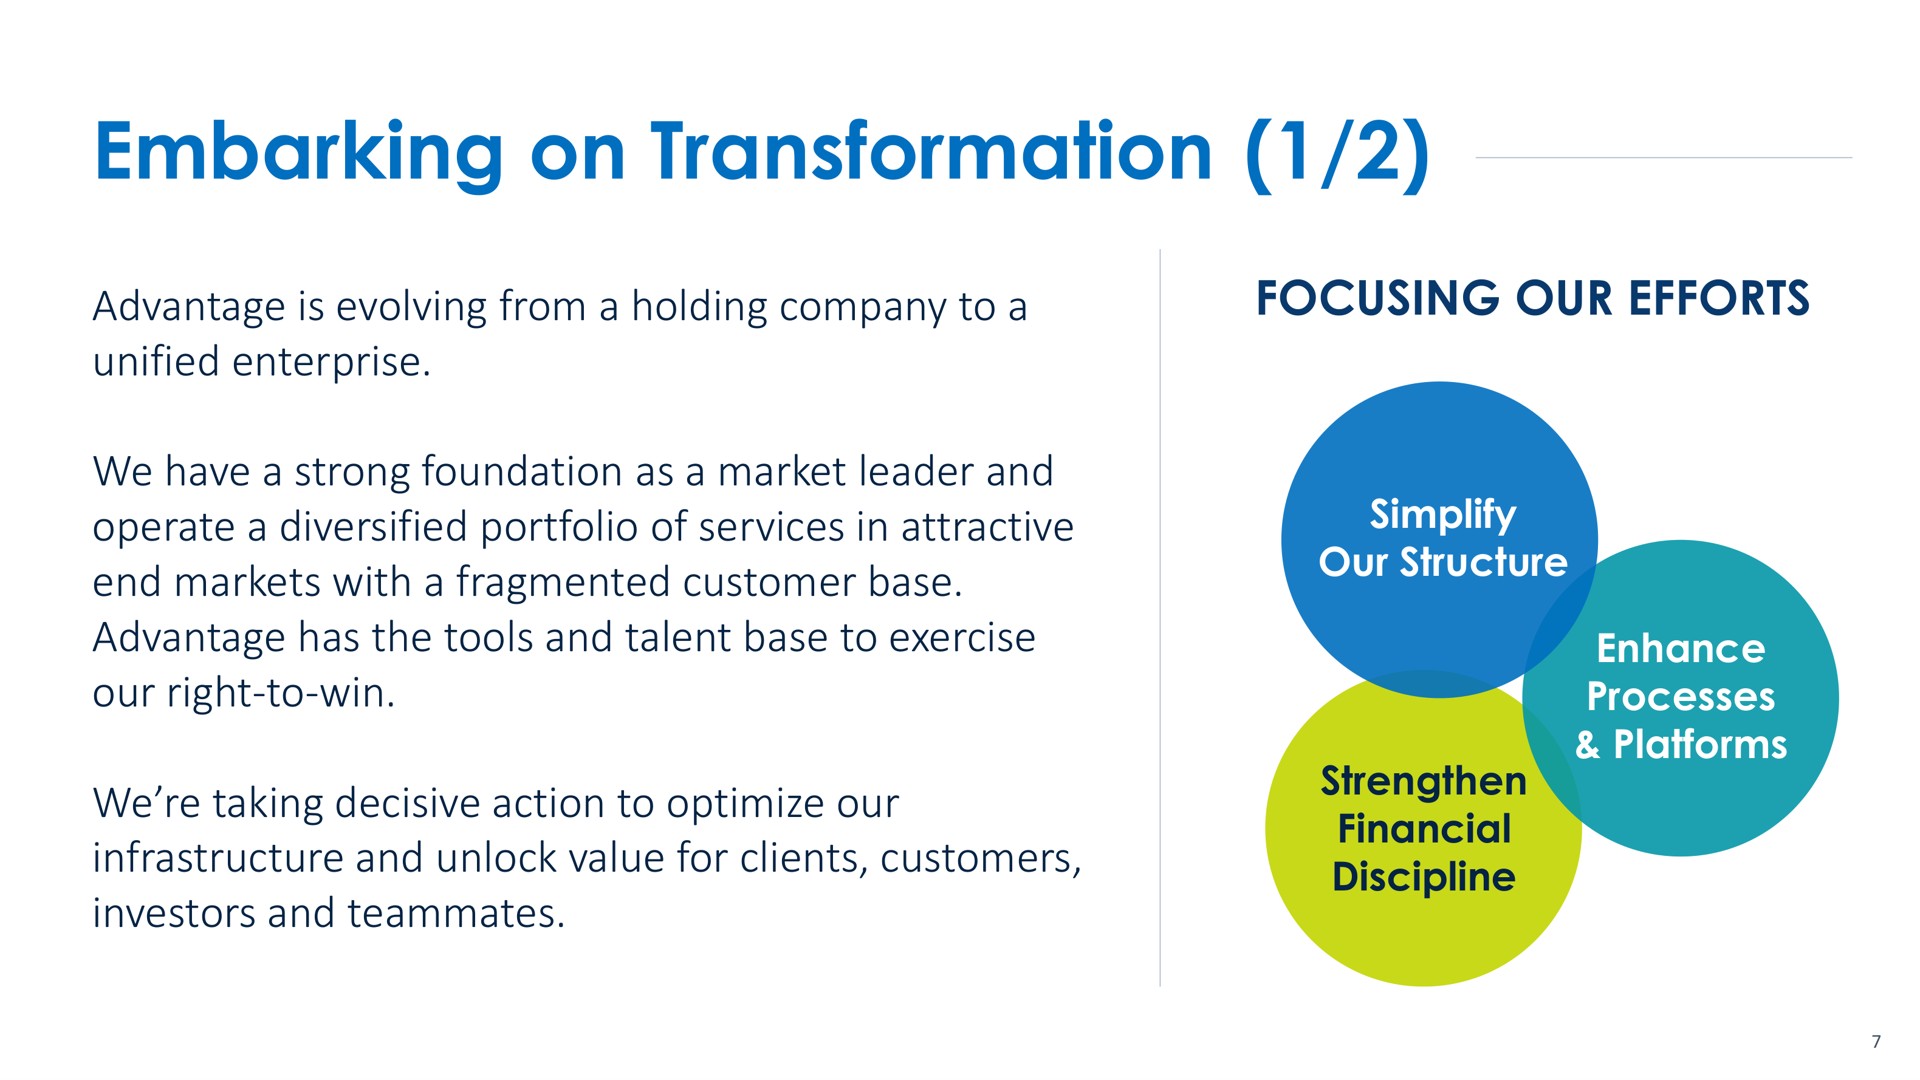 embarking on transformation advantage is evolving from a holding company to a unified enterprise focusing our efforts we have a strong foundation as a market leader and operate a diversified portfolio of services in attractive end markets with a fragmented customer base advantage has the tools and talent base to exercise our right to win we taking decisive action to optimize our infrastructure and unlock value for clients customers investors and teammates simplify our structure strengthen financial discipline enhance processes platforms | Advantage Solutions